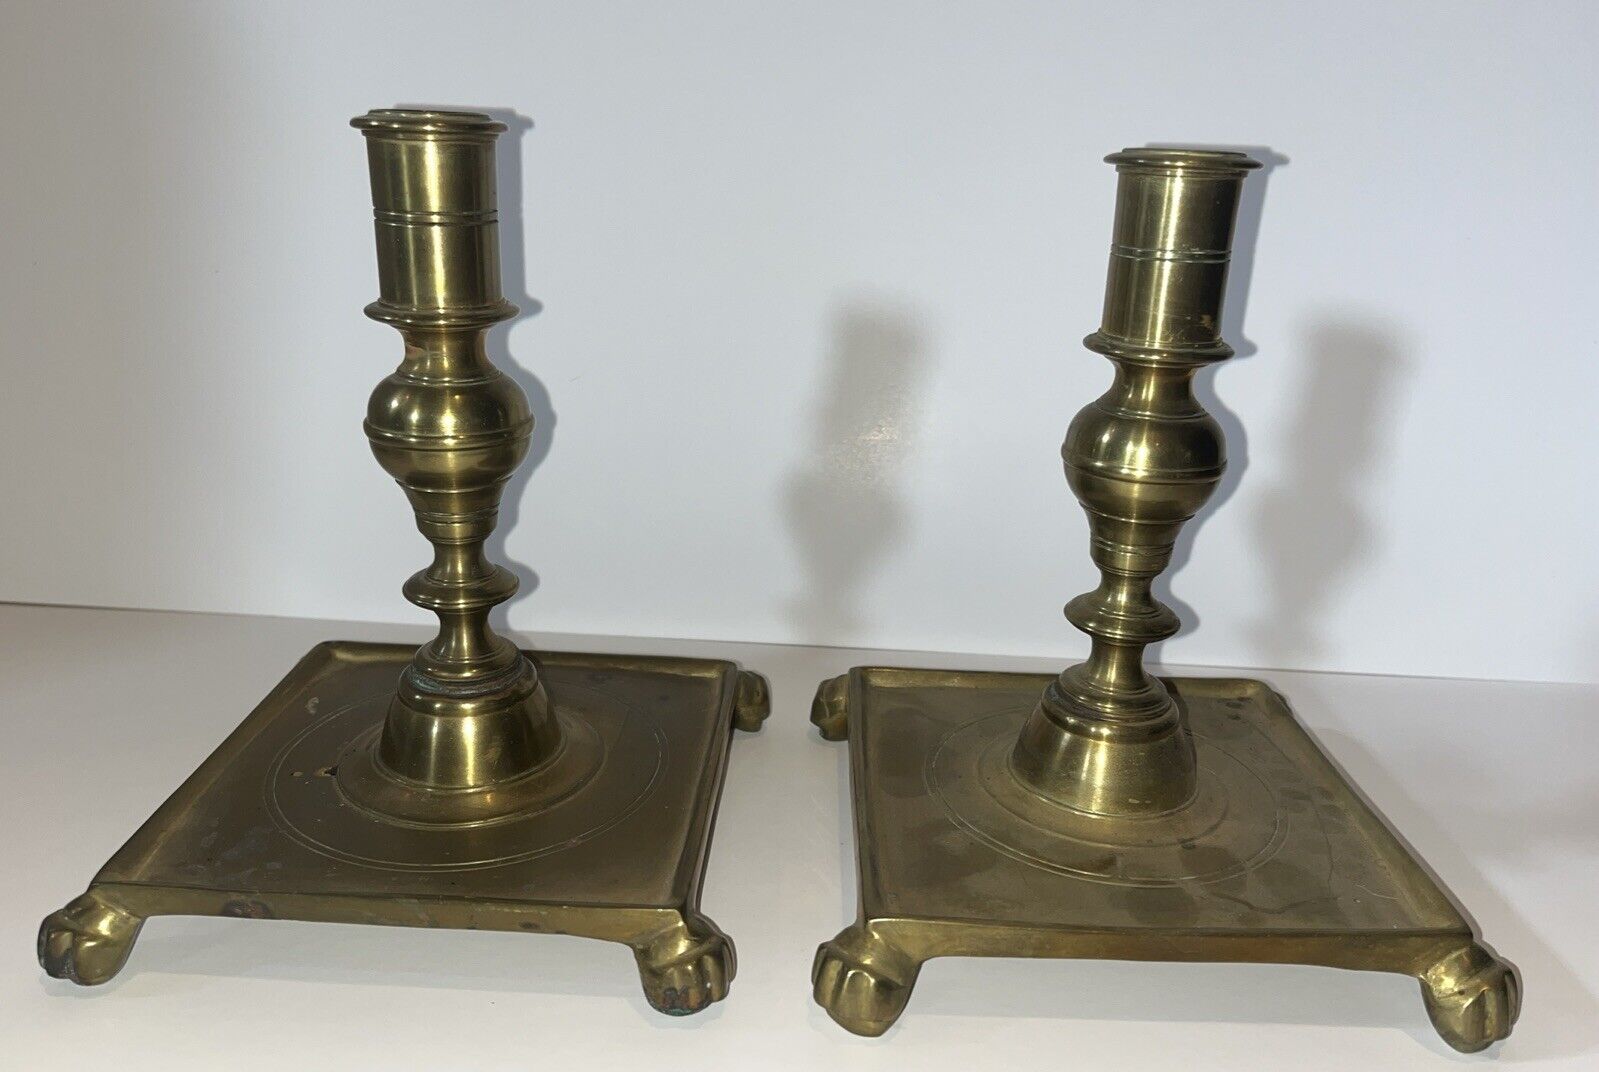 2 Virginia Metalcrafters Brass Candlesticks Colonial Williamsburg CW16-5 Vintage